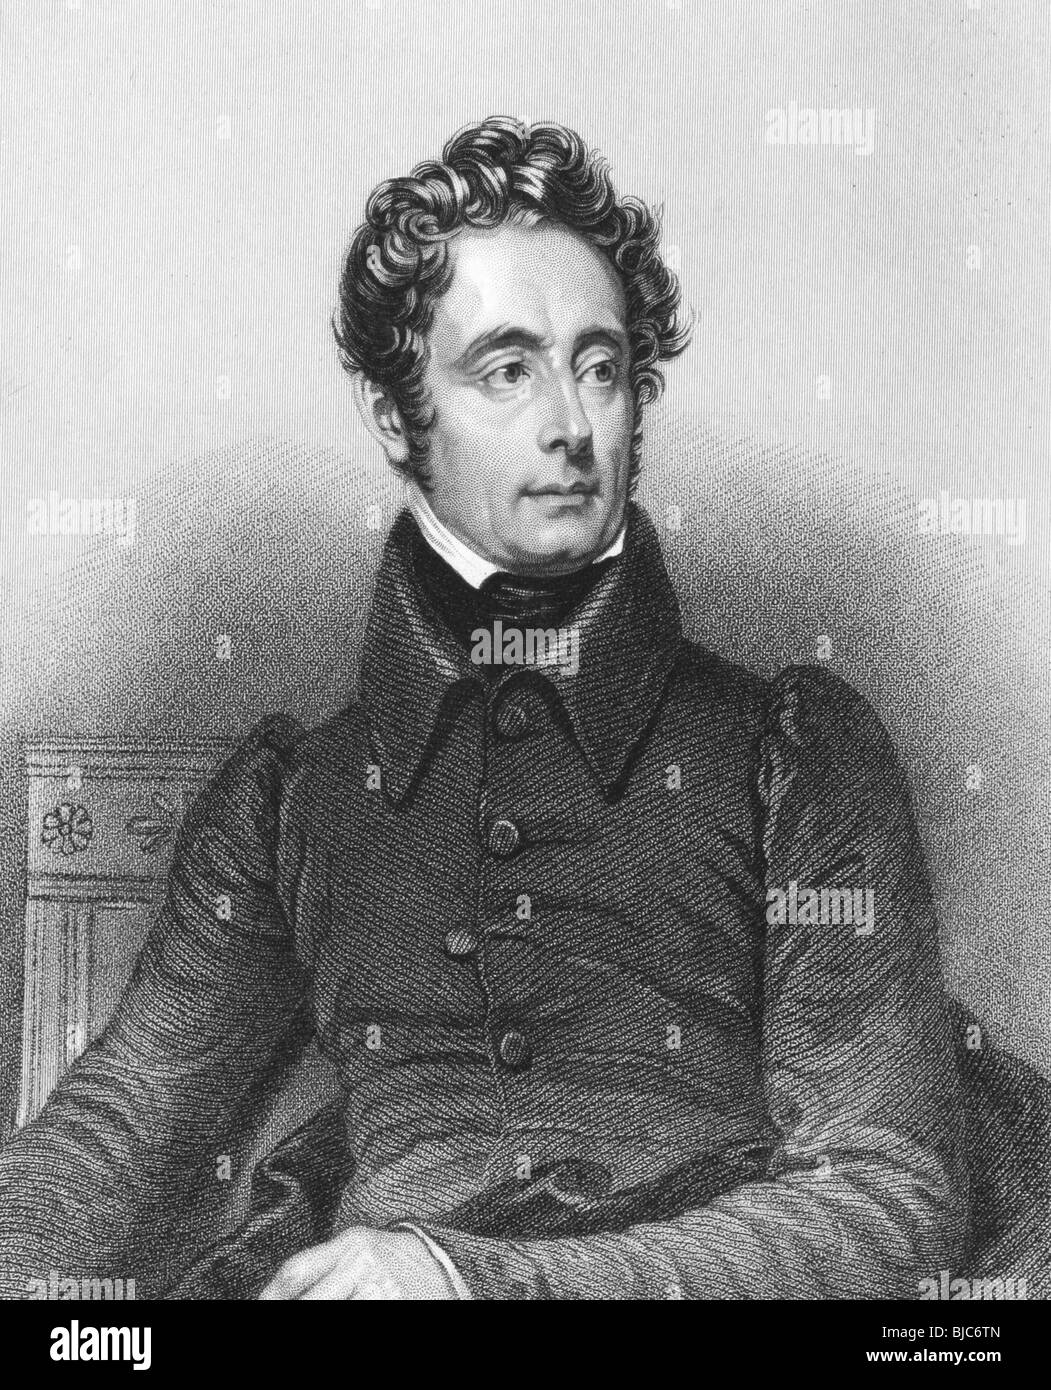 Alphonse de Lamartine (1790-1869) on engraving from the 1800s. French writer, poet and politician. Stock Photo